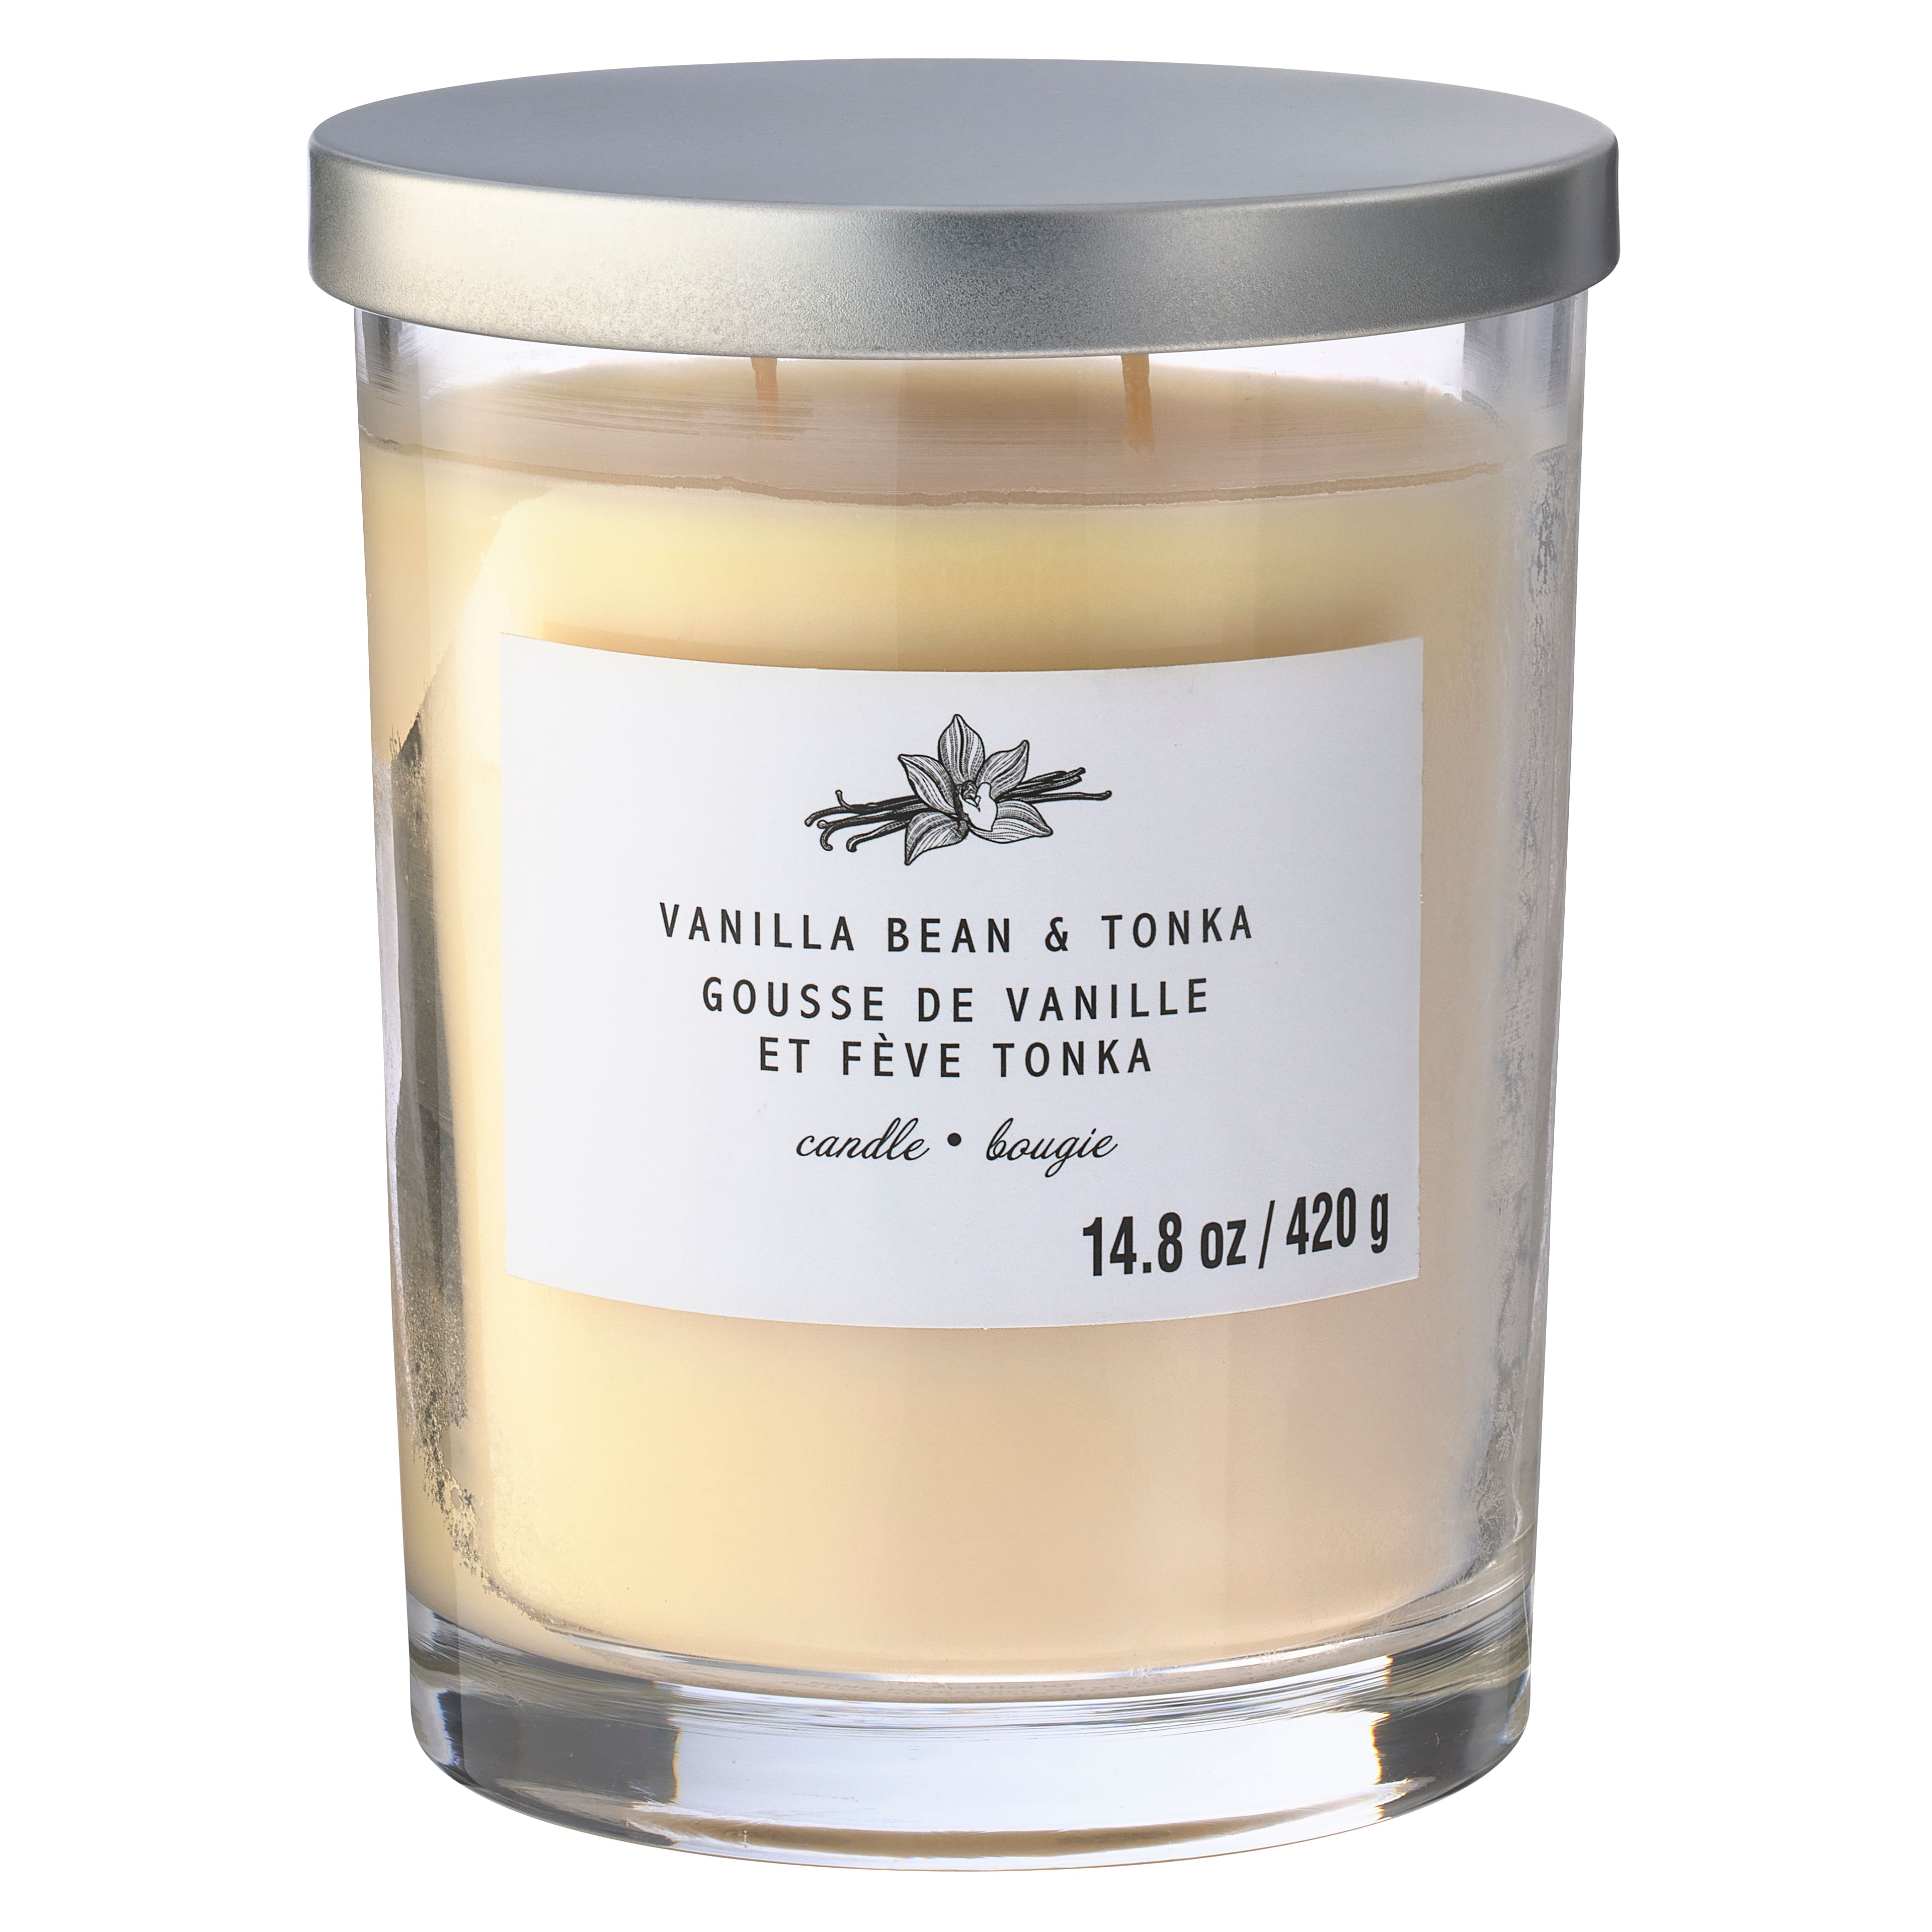 Scent Beads Wax Bead Candle, Very Vanilla - 1 candle, 7 oz